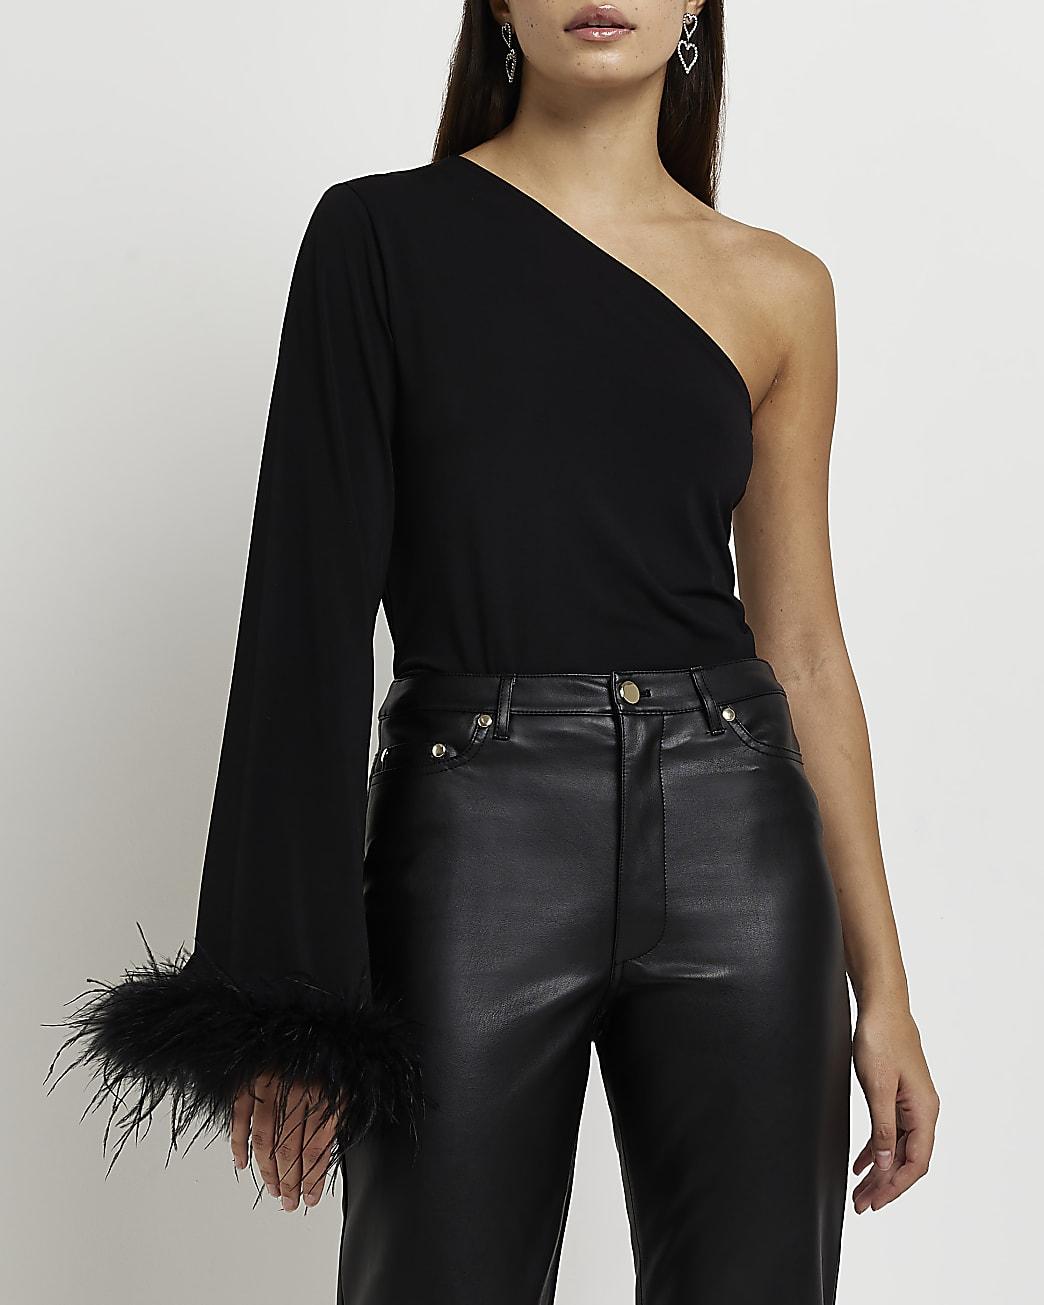 River Island One Shoulder Feather Trim Top in Black | Lyst